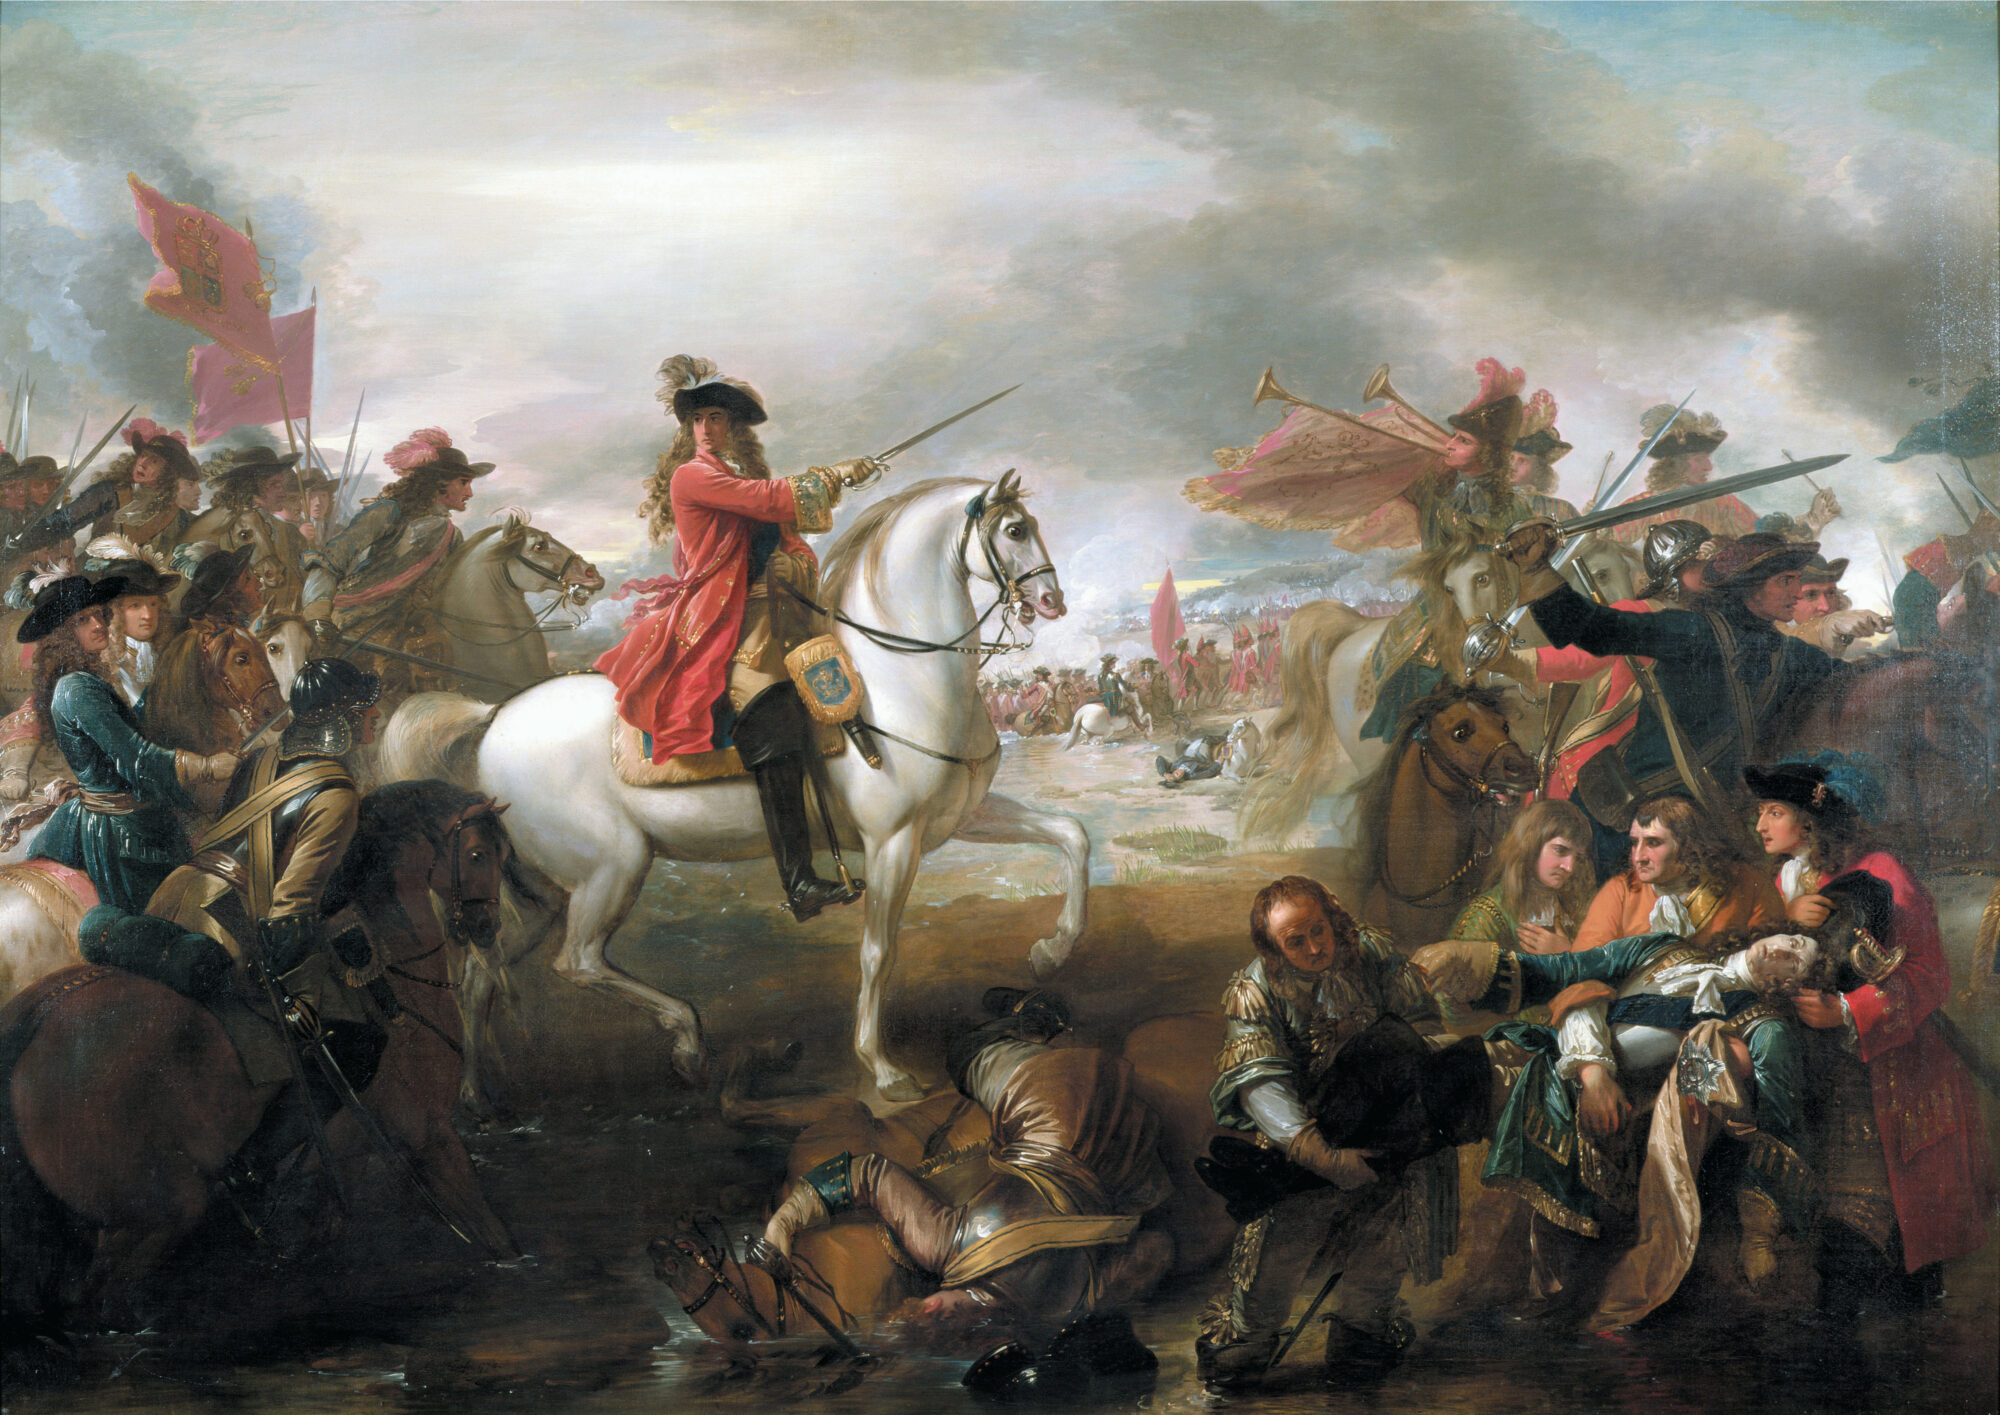 Resplendent atop a white war horse, William III leads his expeditionary force against his deposed uncle, King James II, at the Battle of the Boyne in this 18th-century painting by Benjamin West.